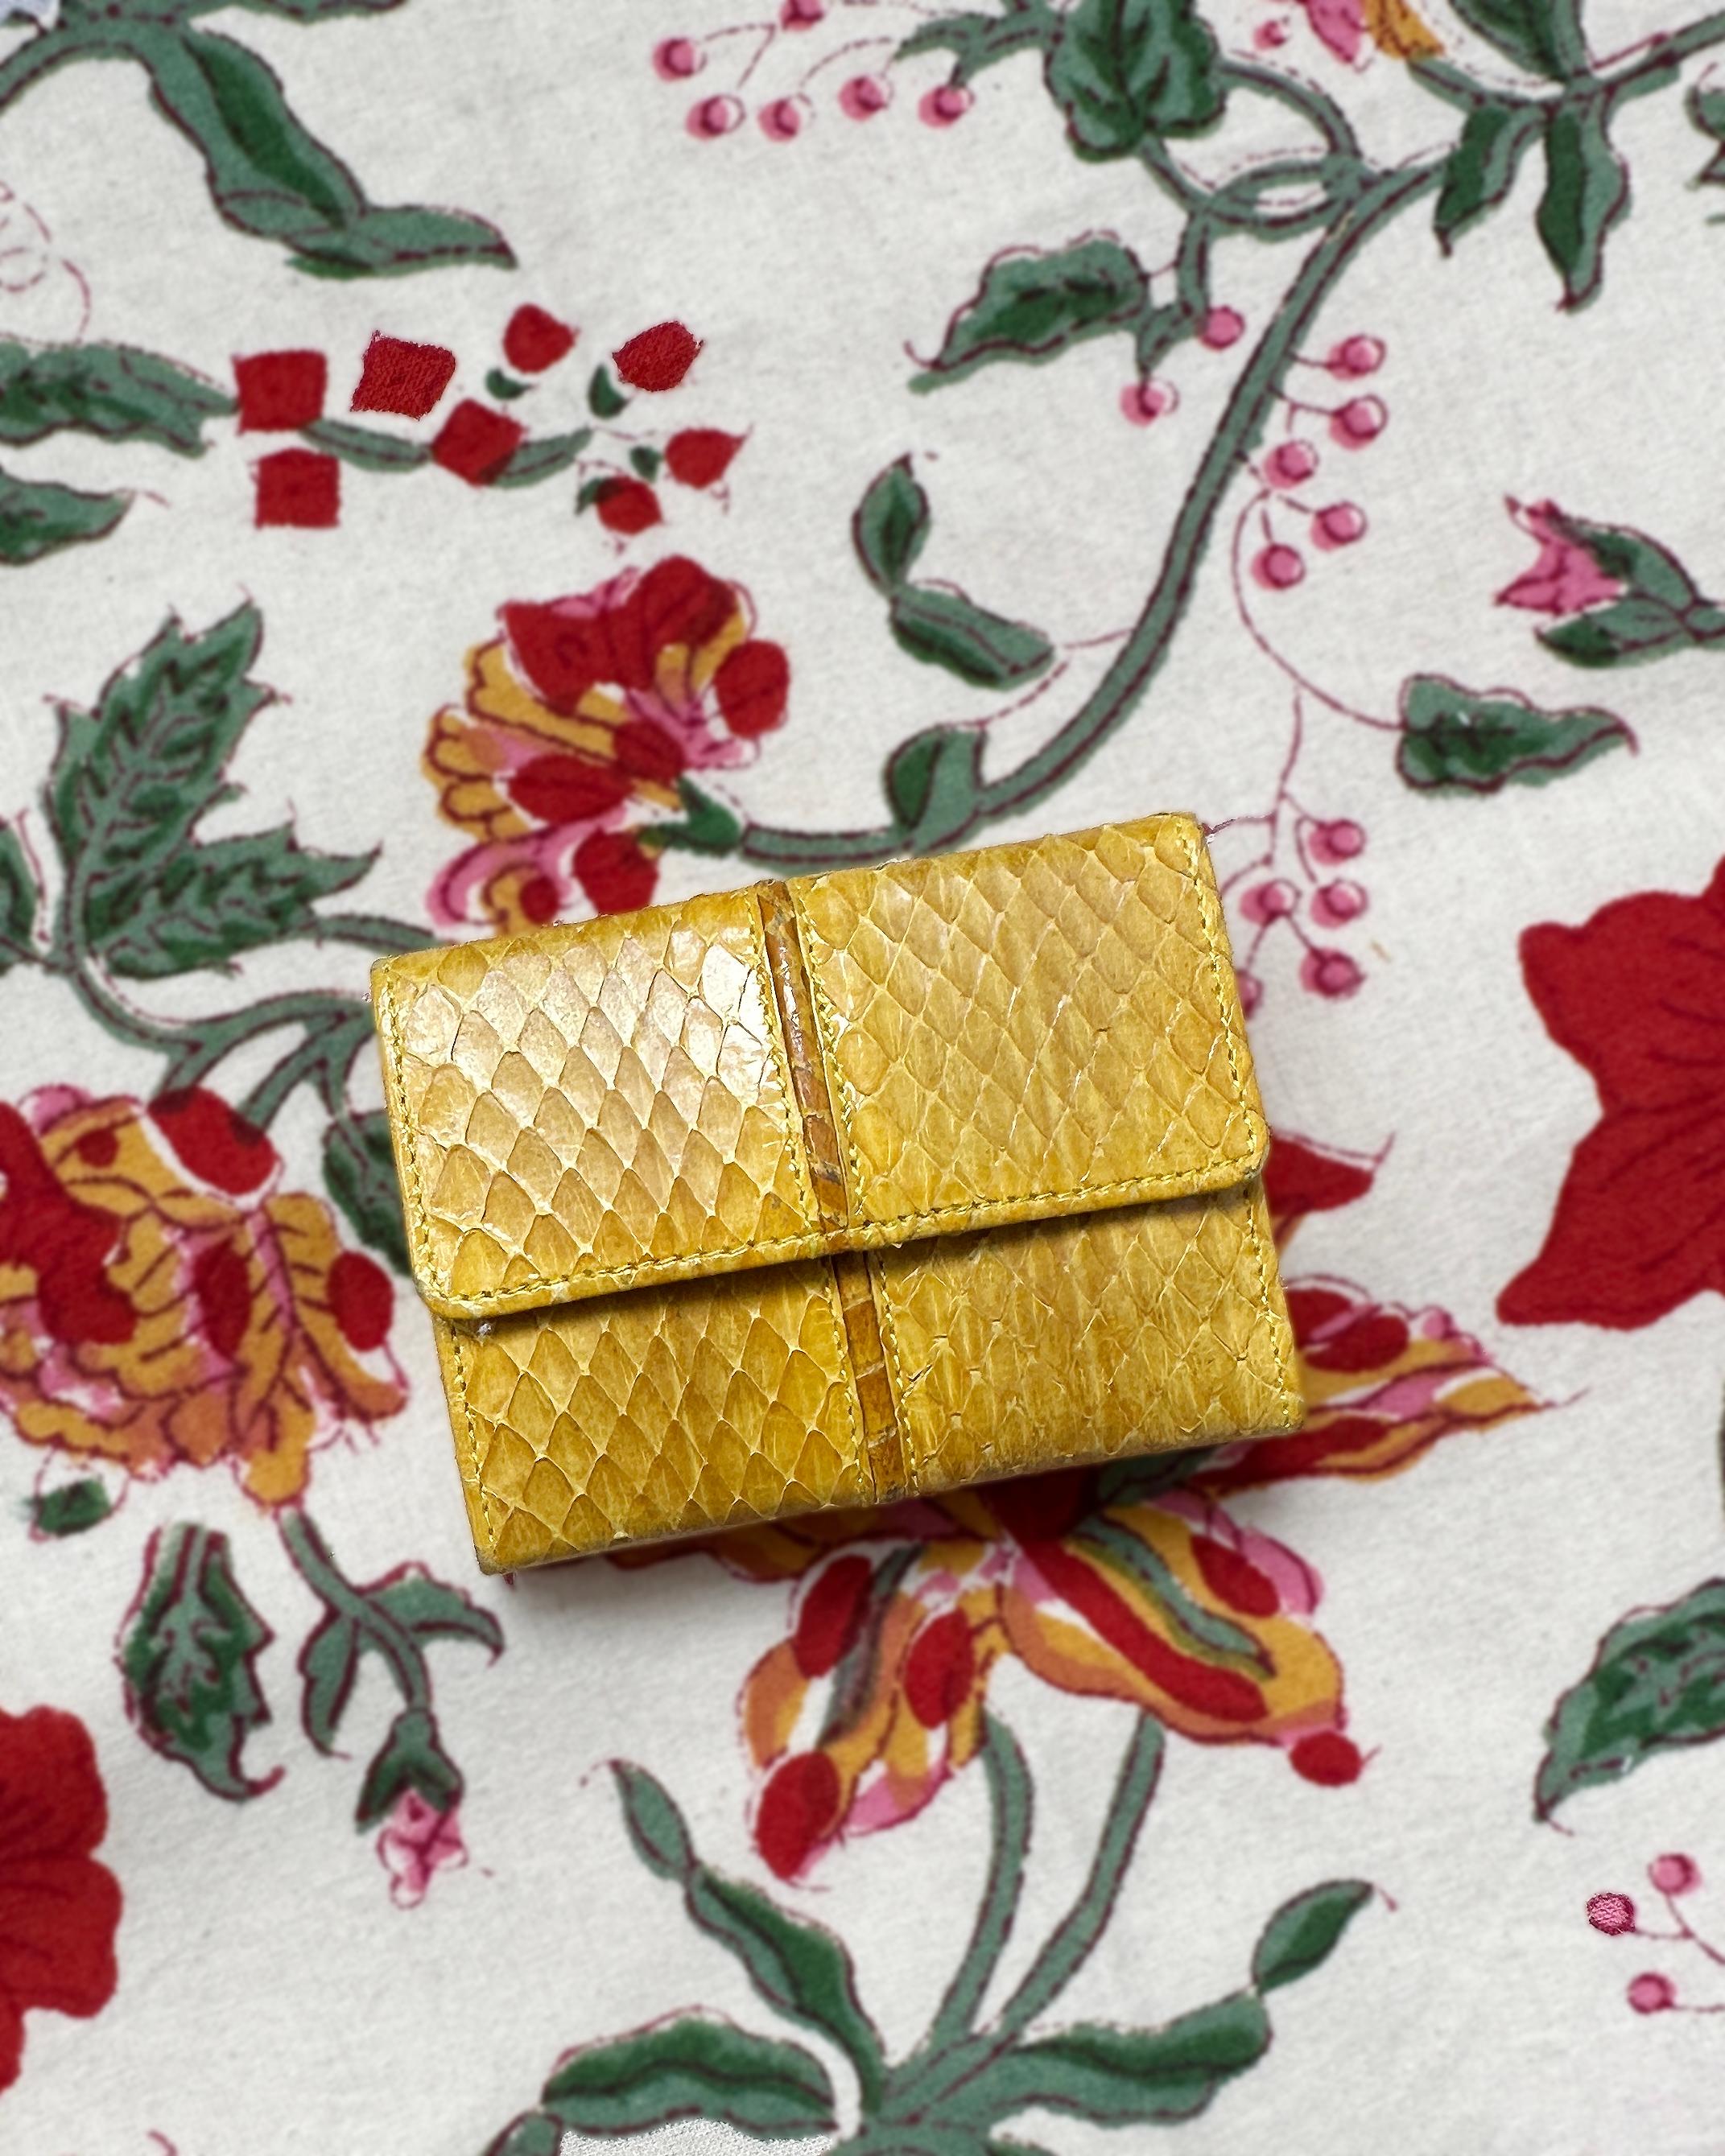 Vintage Judith Leiber Snakeskin Wallet In Excellent Condition For Sale In New York, NY